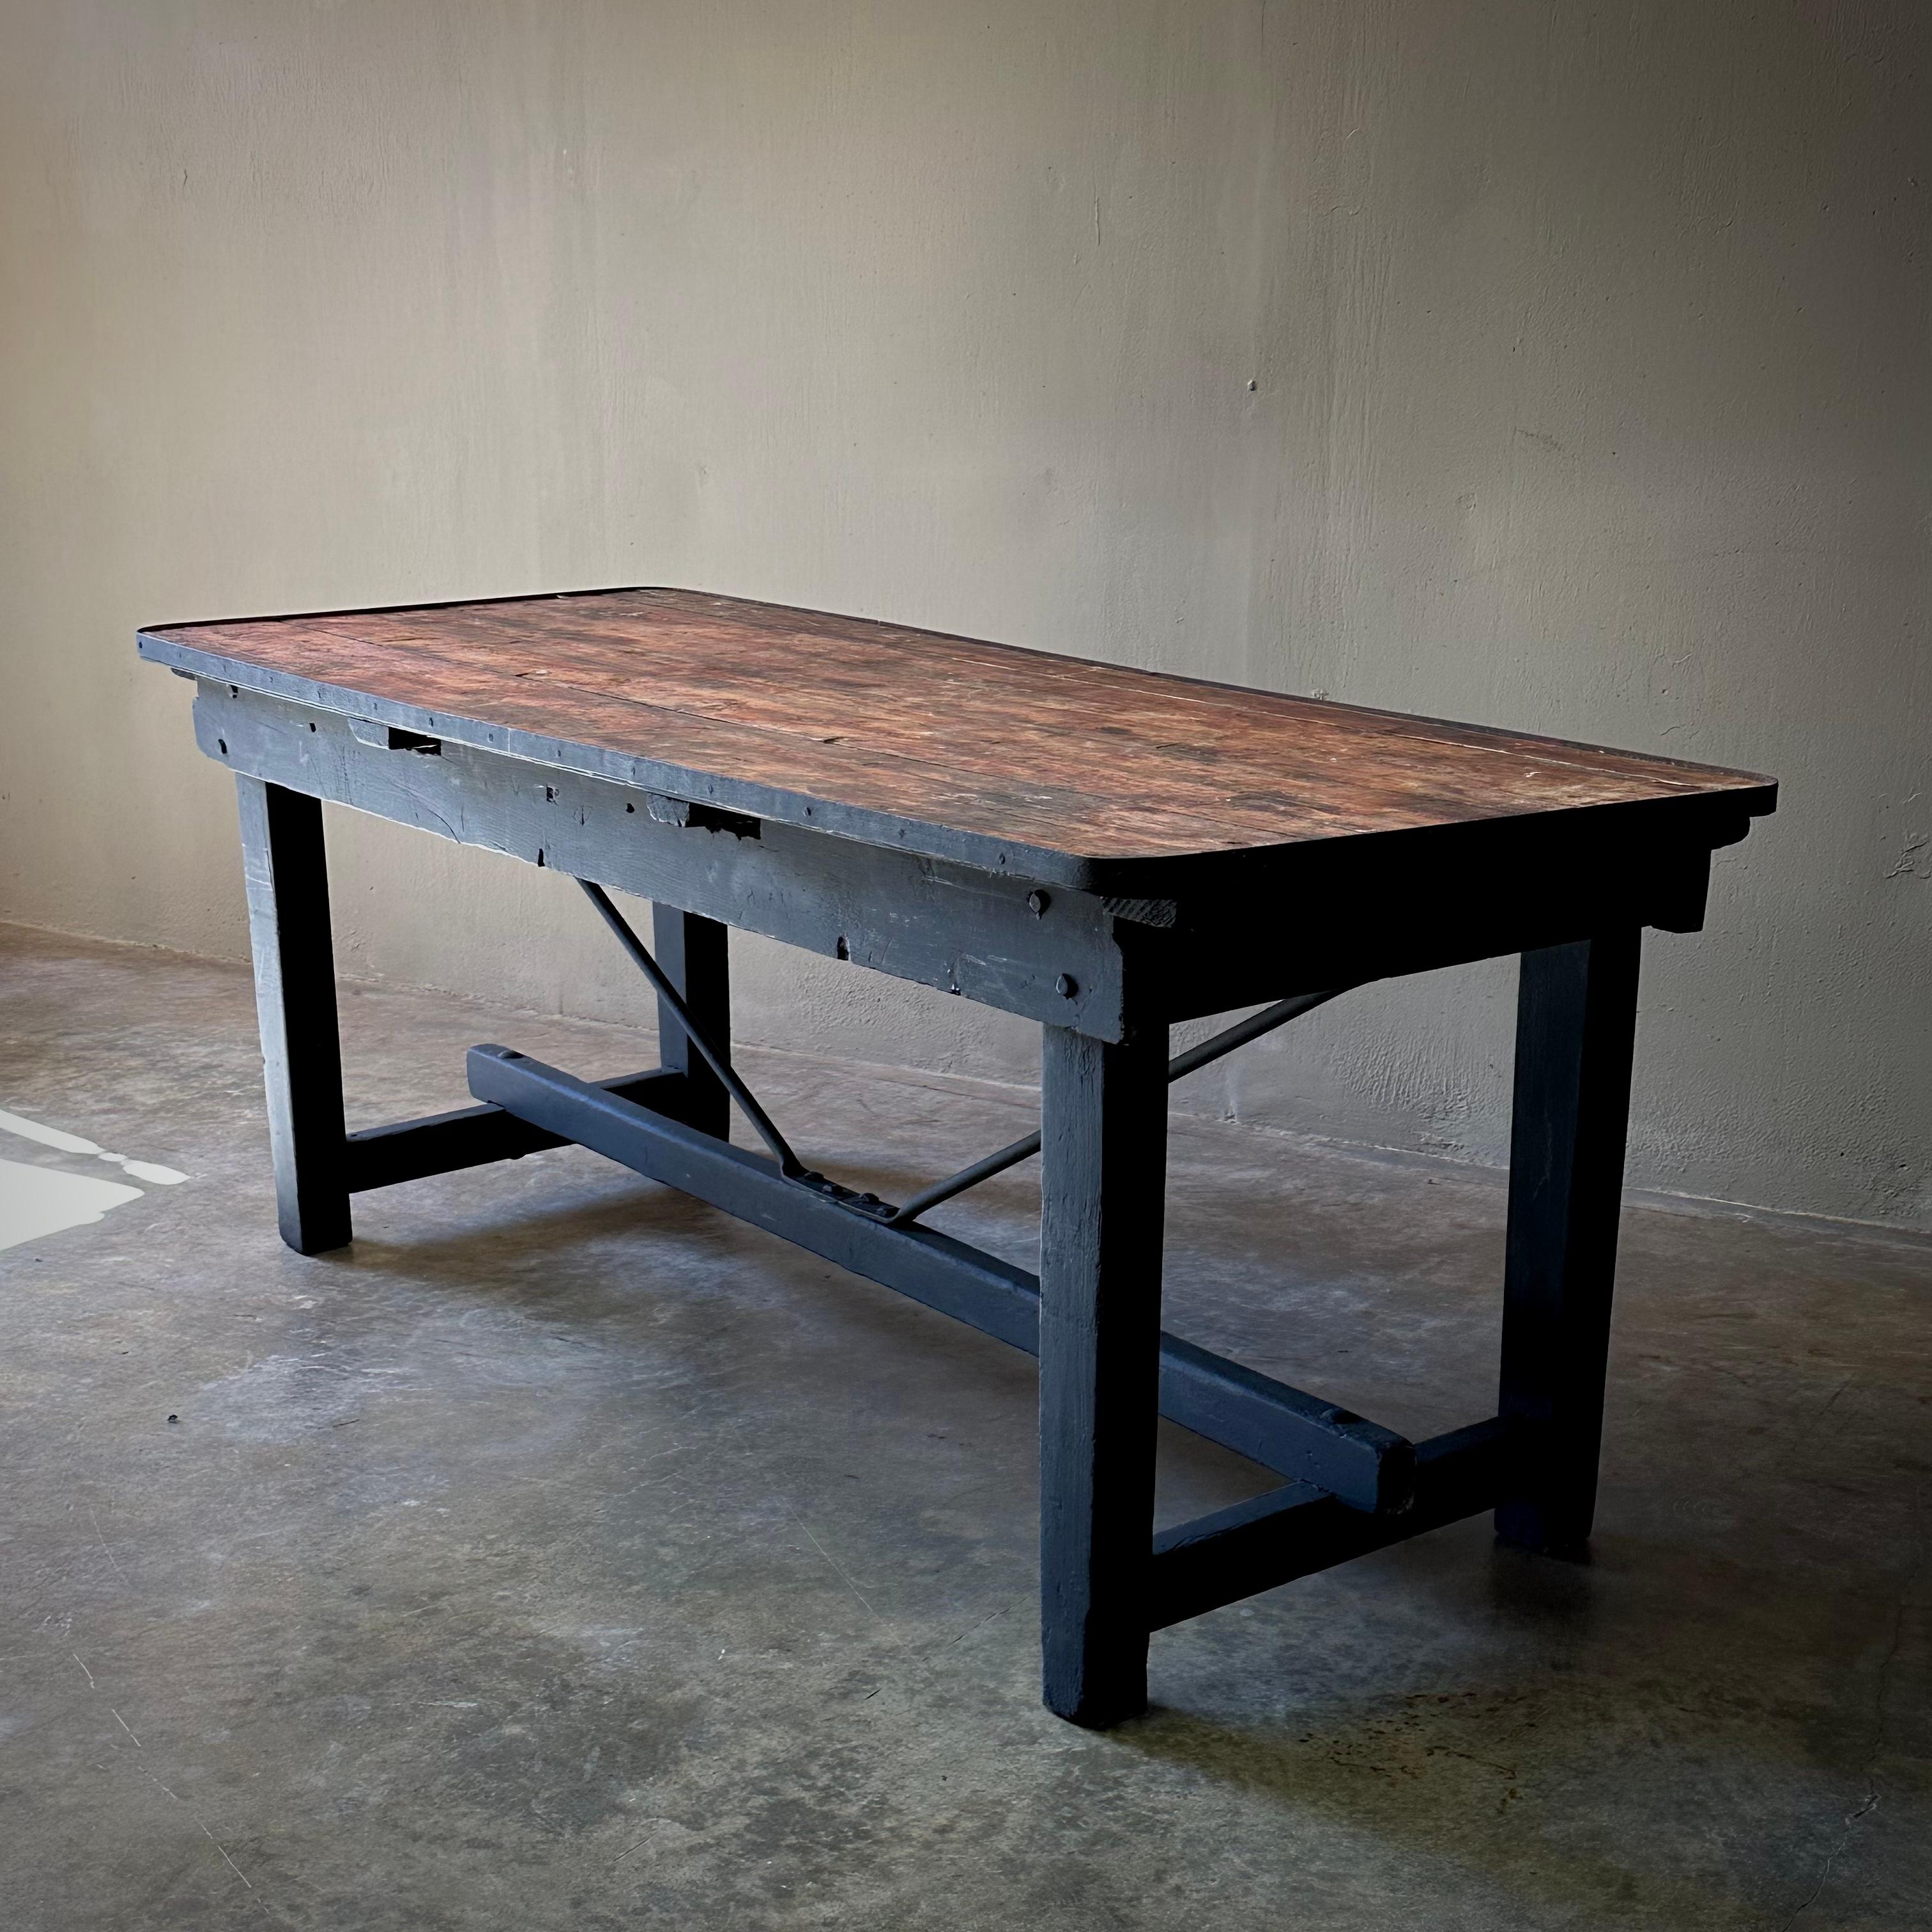 Early 20th century Swedish industrial table with wood top and black painted wood base. A versatile piece with strong, simple lines and a rustic utilitarian feel. Would work well in both indoor and outdoor spaces alike, especially as a buffet or